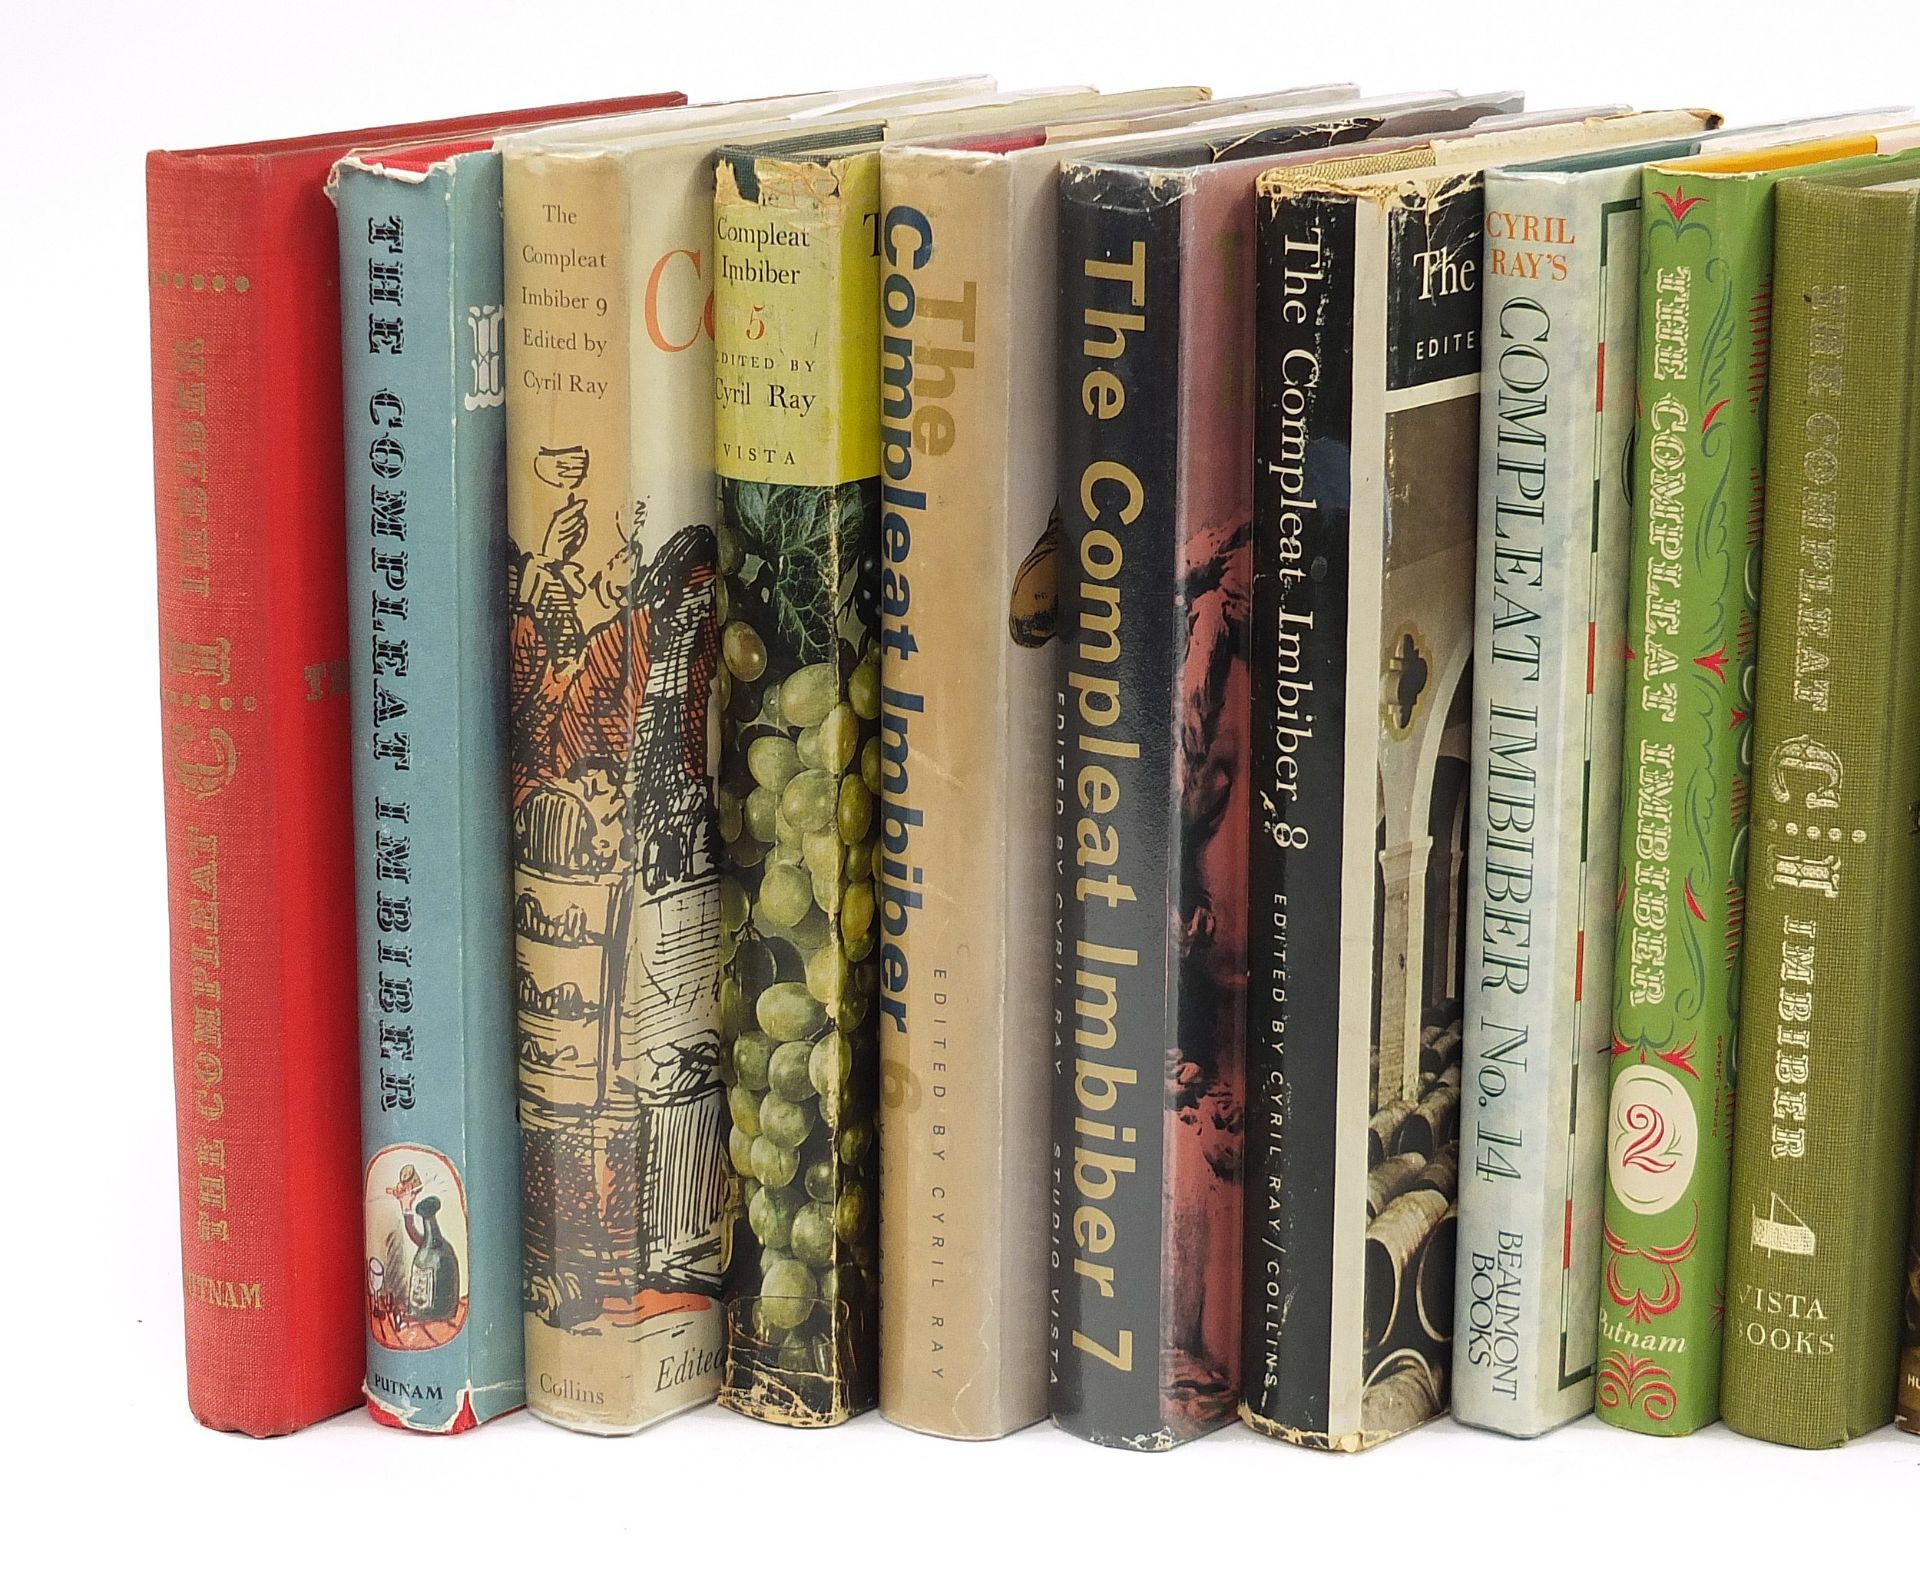 Sixteen volumes of The Compleat Imbiber, by Cyril Ray, some with dust jackets - Image 2 of 3